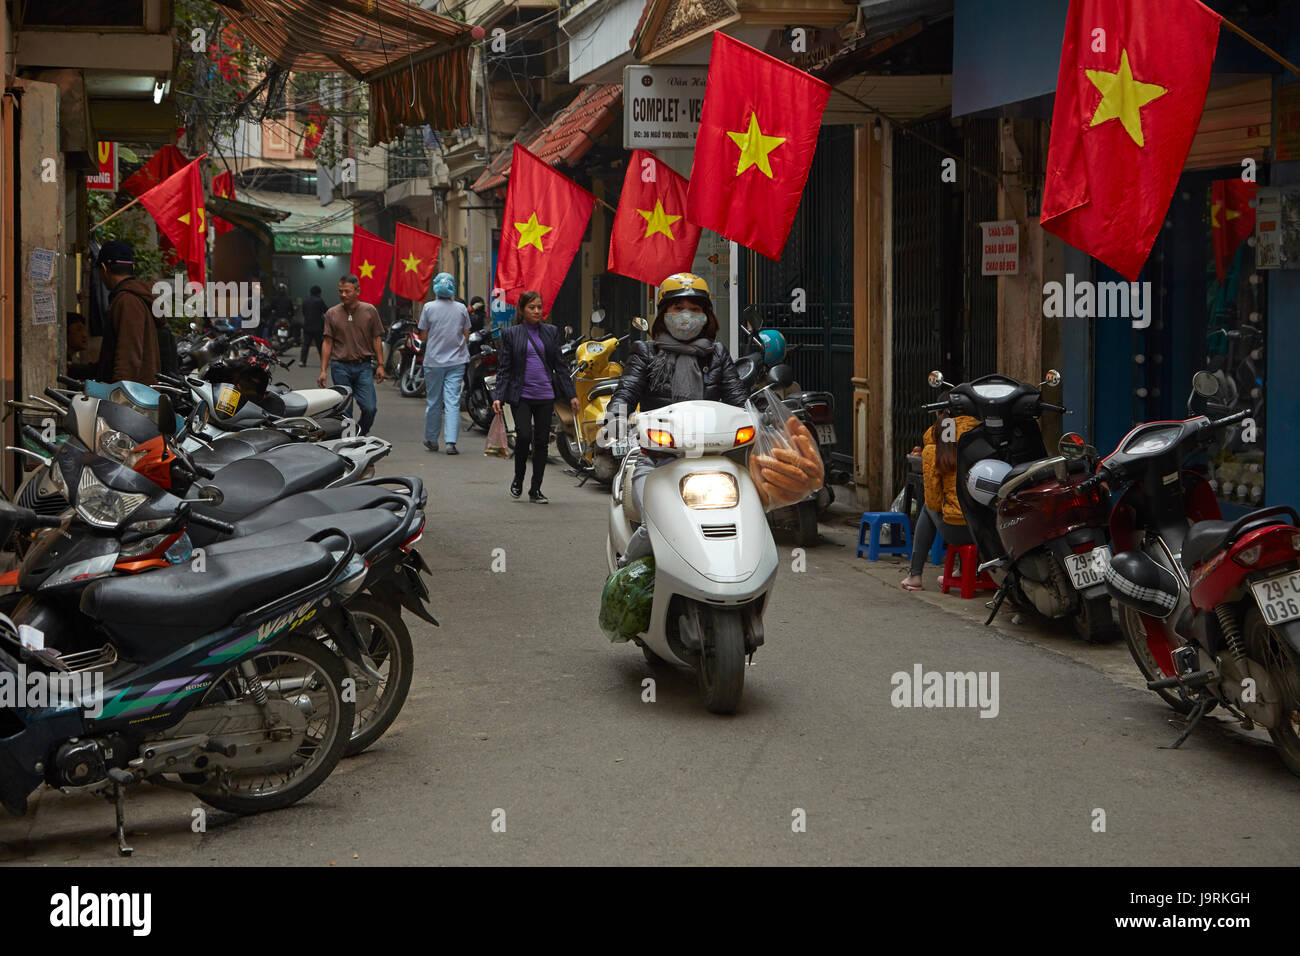 Vietnamese flags and woman riding scooter down alleyway, Old Quarter, Hanoi, Vietnam Stock Photo